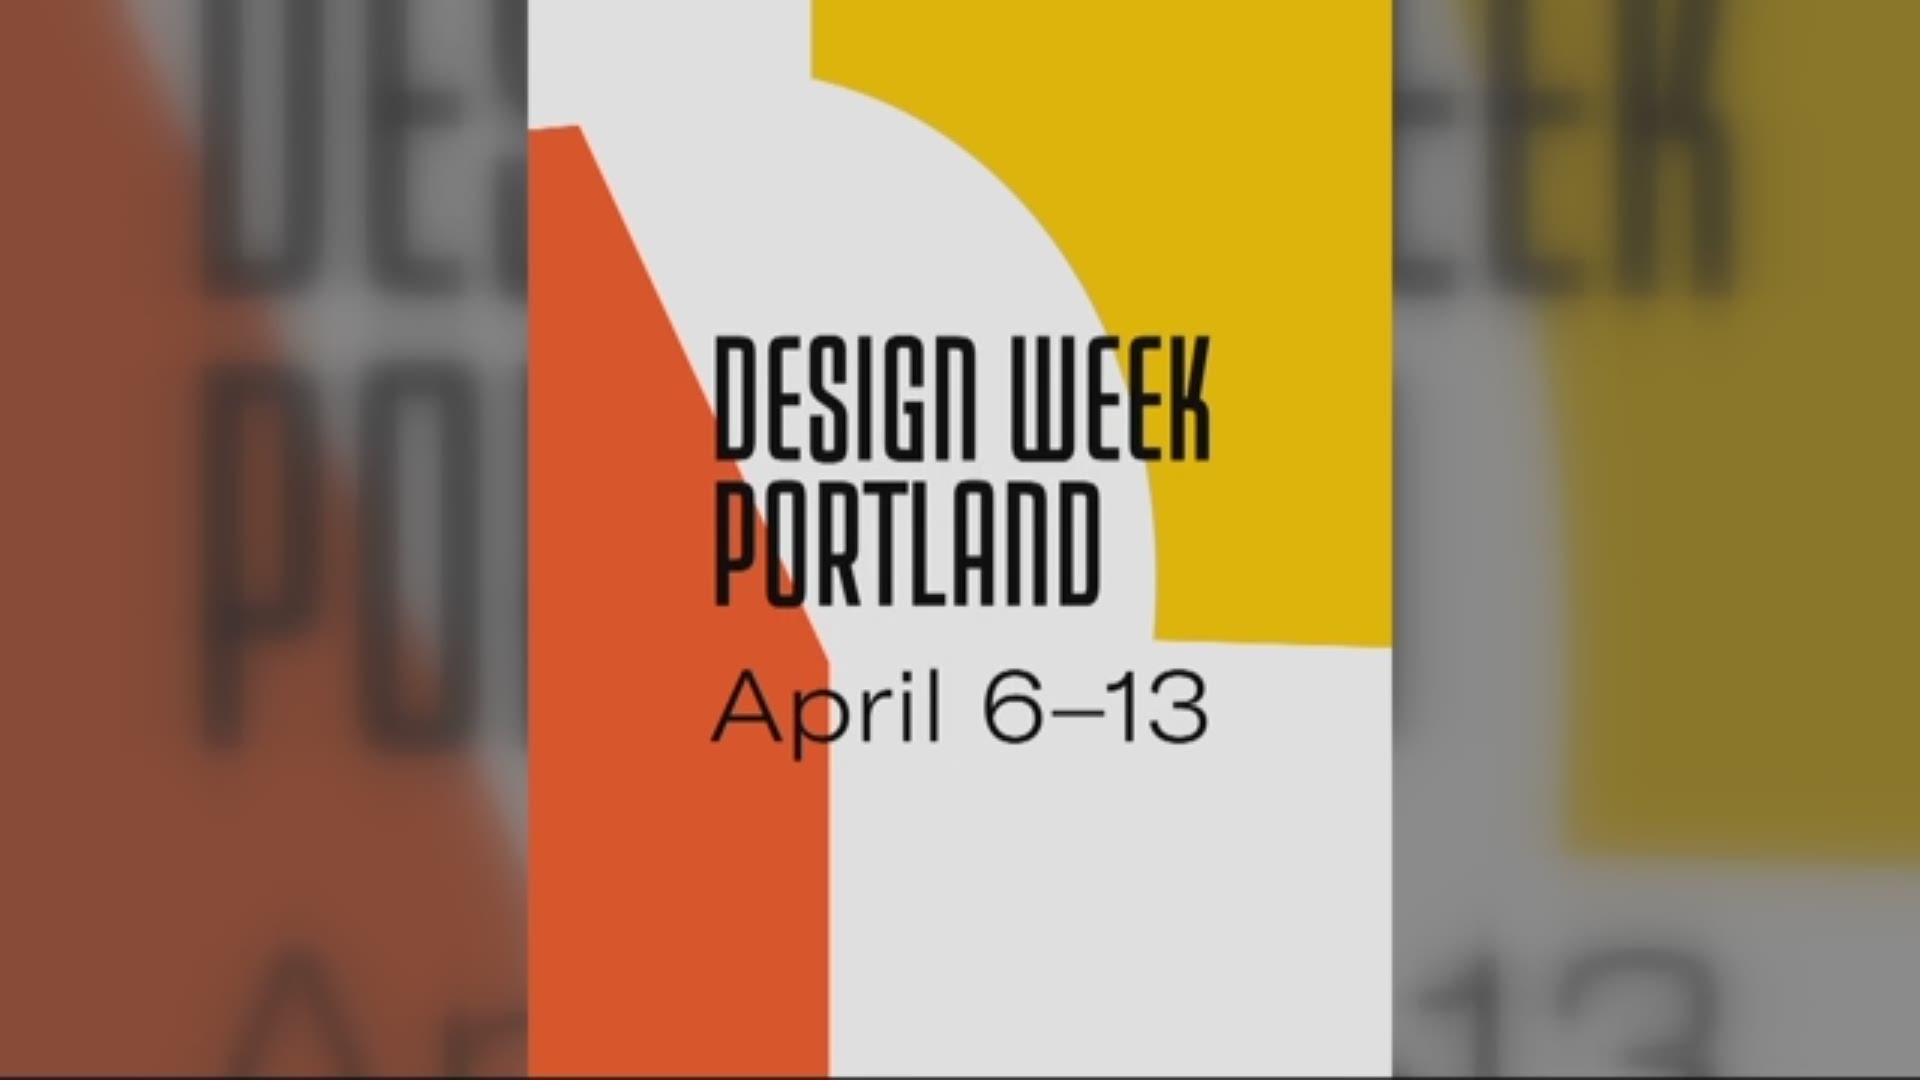 Check out a moto-inspired fashion show during Design Week Portland

designportland.org

#TonightwithCassidy